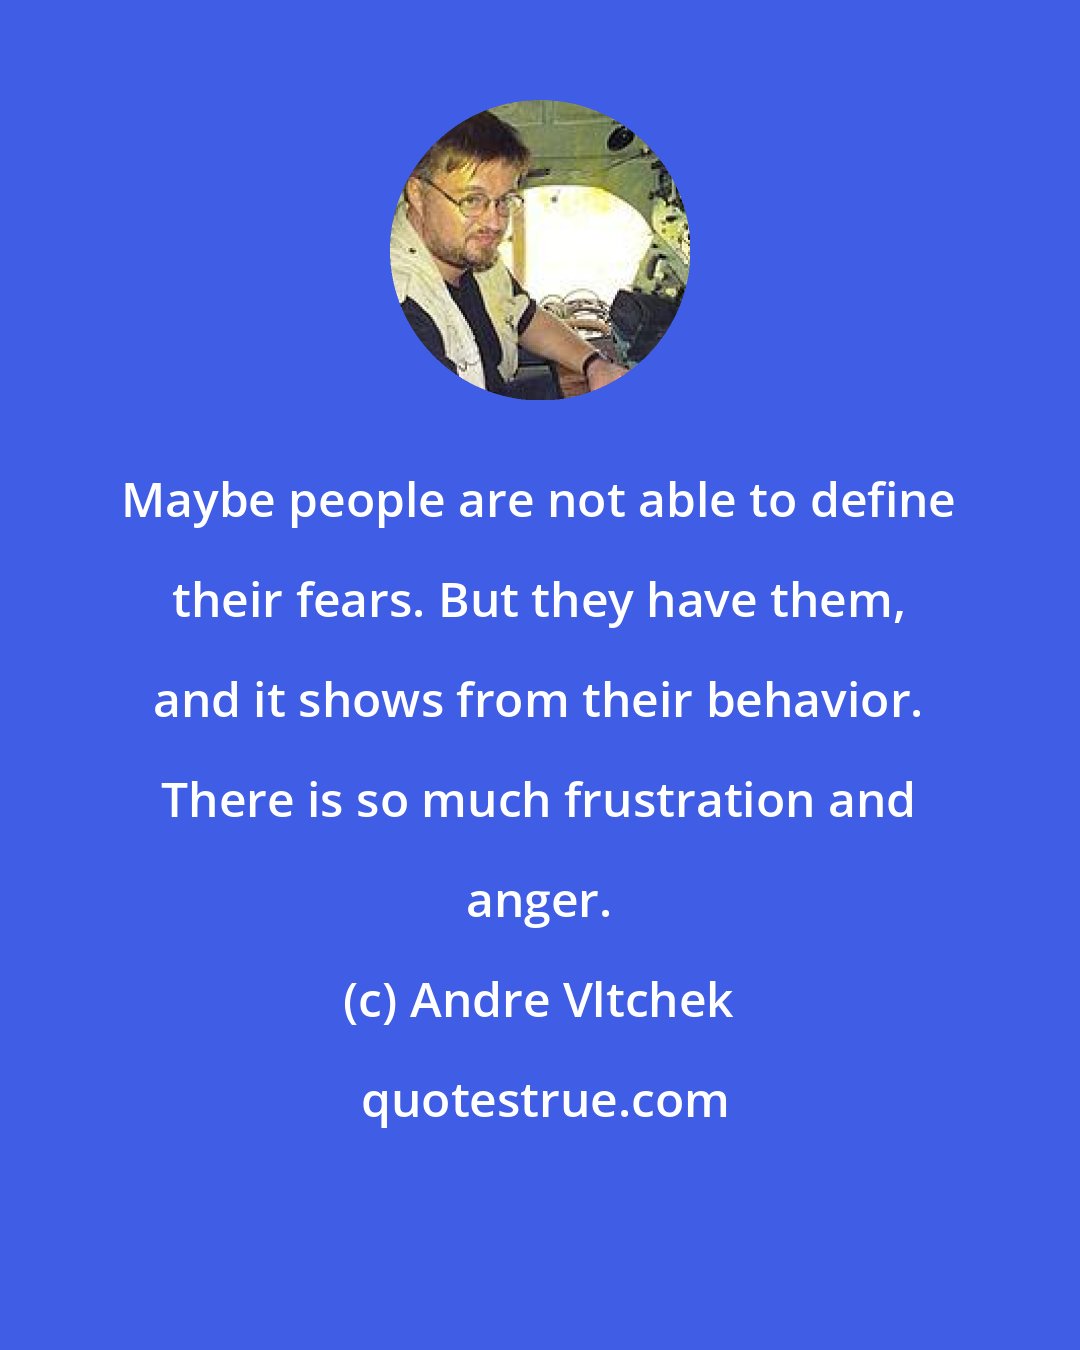 Andre Vltchek: Maybe people are not able to define their fears. But they have them, and it shows from their behavior. There is so much frustration and anger.